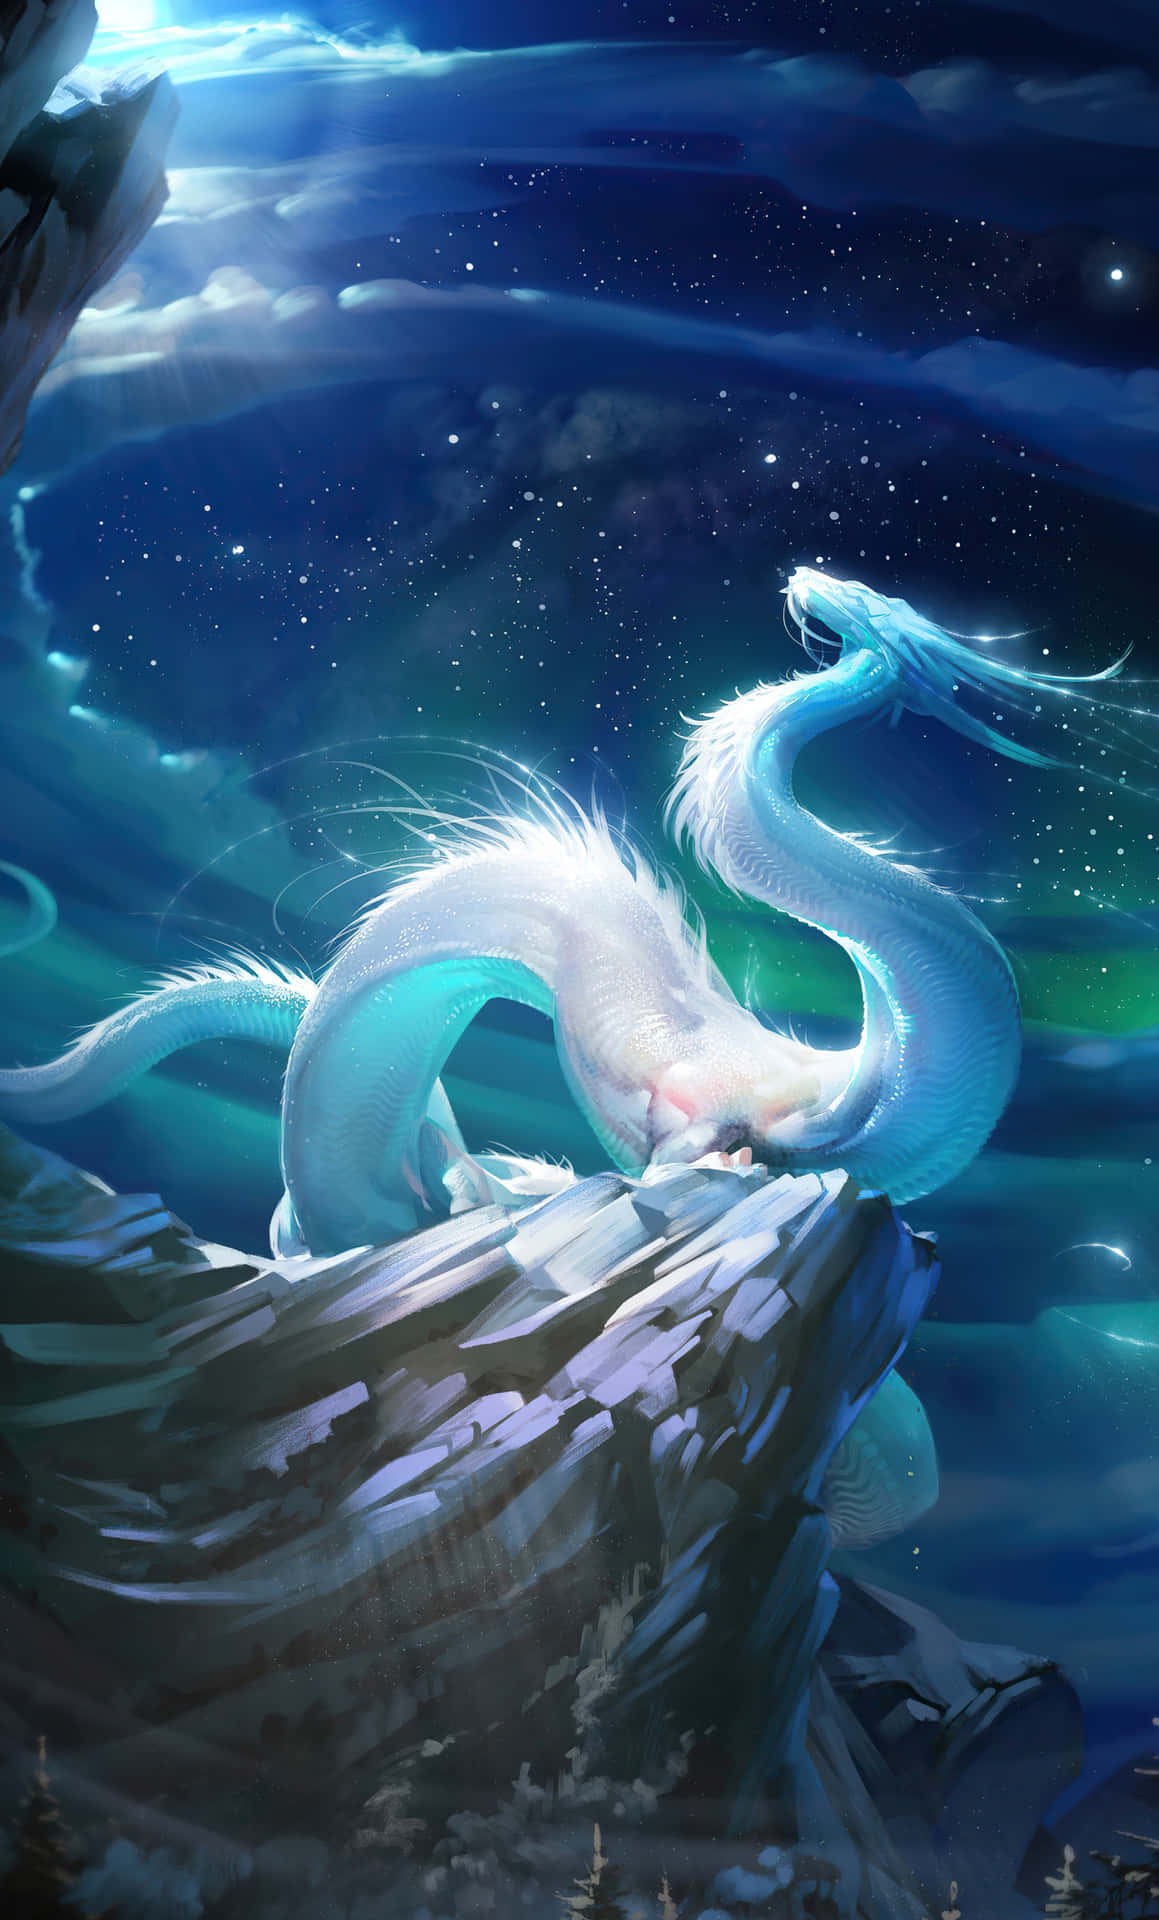 'Let Your Imagination Take Flight With A Mystical Dragon' Wallpaper